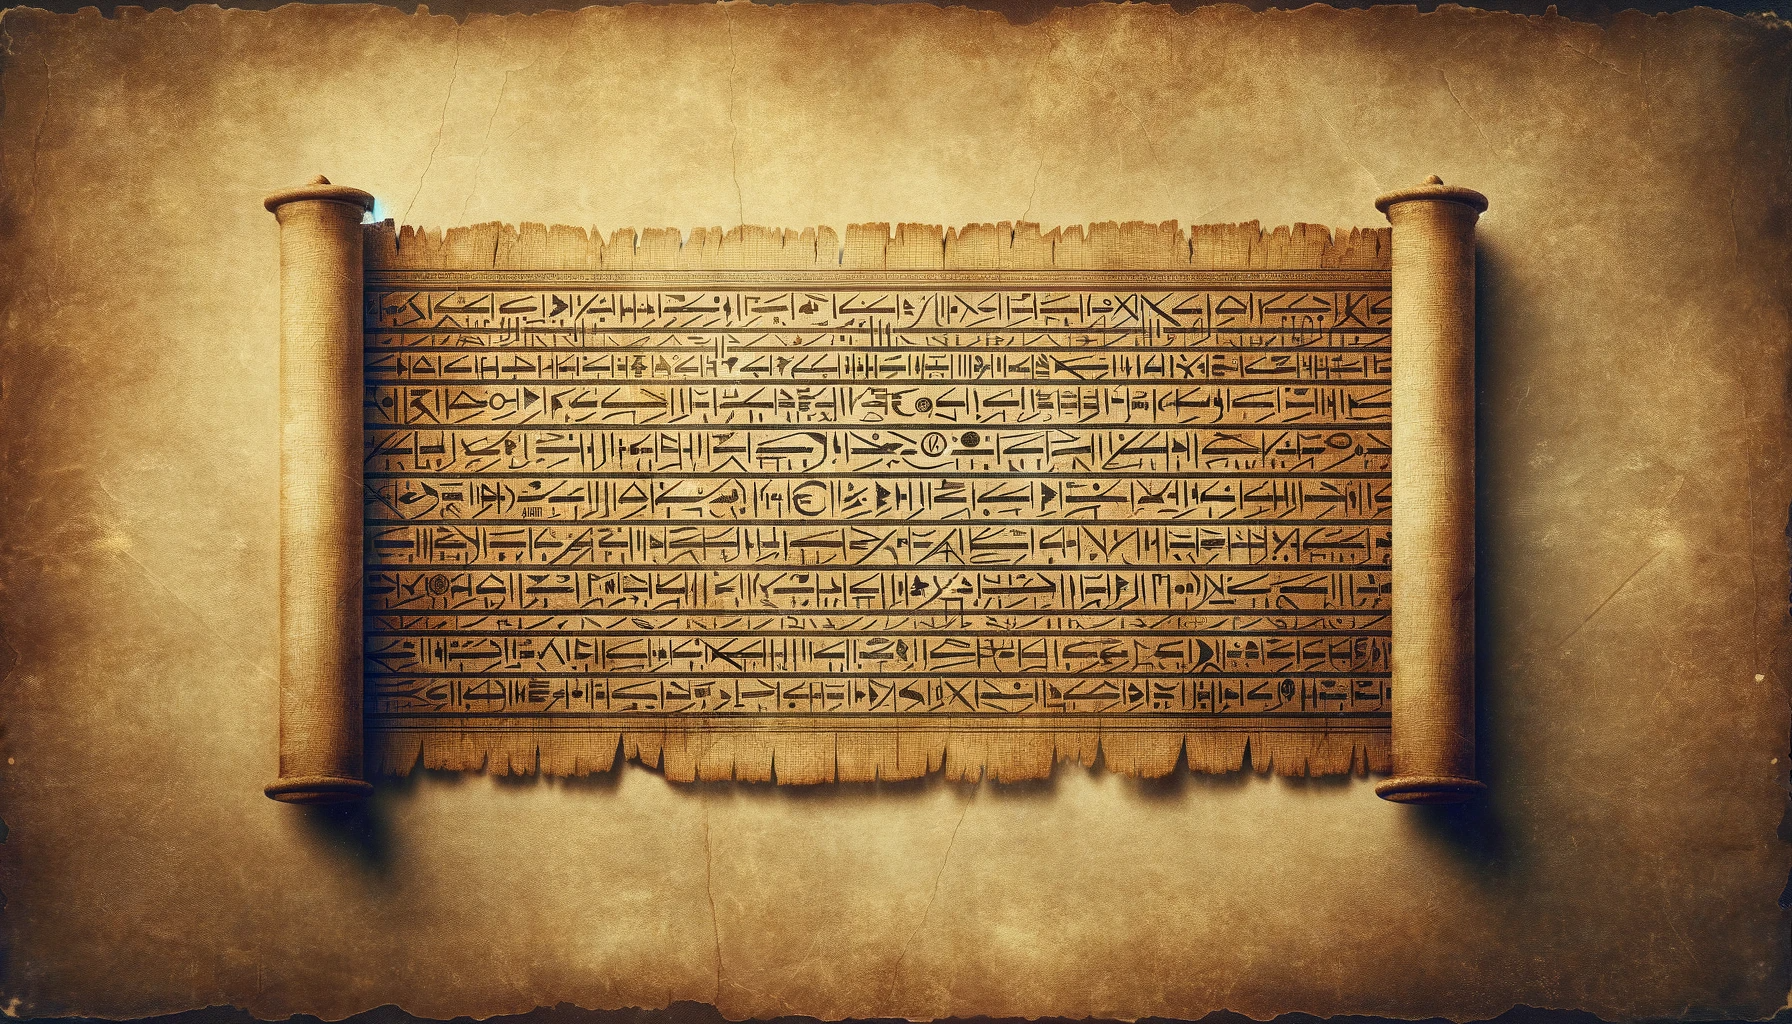 A strip of papyrus crossing the frame, adorned with strange, ancient-looking script. 